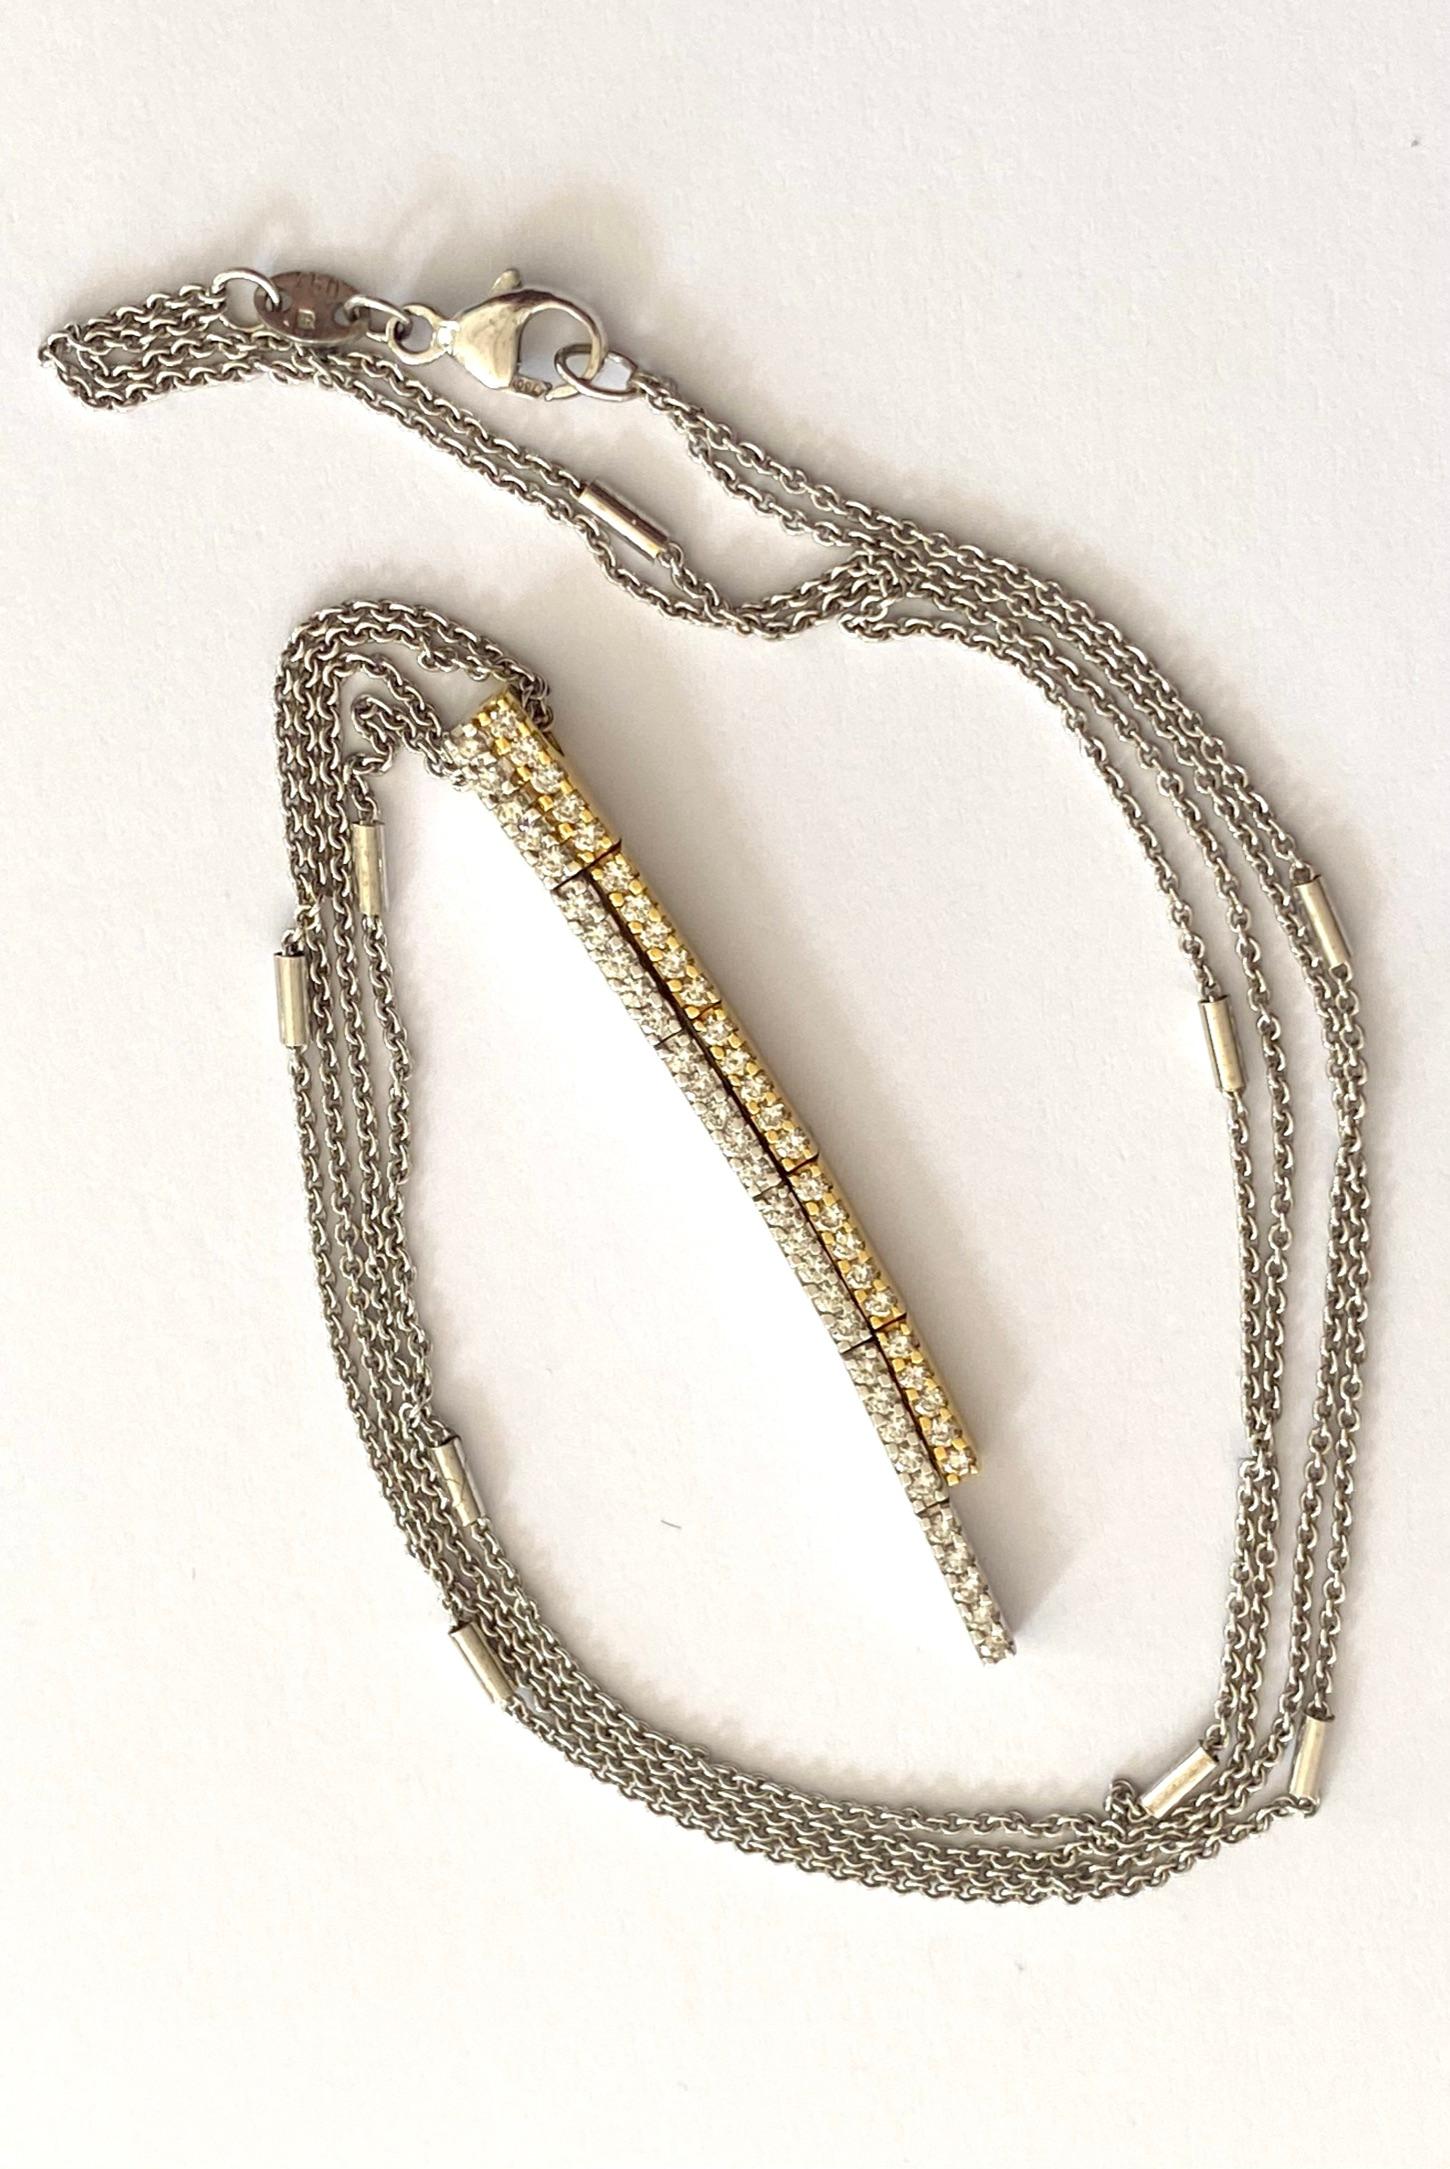 One (1) 18 Karat Yeloow and white Gold Pendant & Chain stamped 750
Pendant has 55 rpound Brilliant Cut Natural Diamonds: 0.67 ct  SI1 - F-G
Lengts of the chain: 42 cm. 

This jewel is accompanied by a jewelery report from Antwerp.